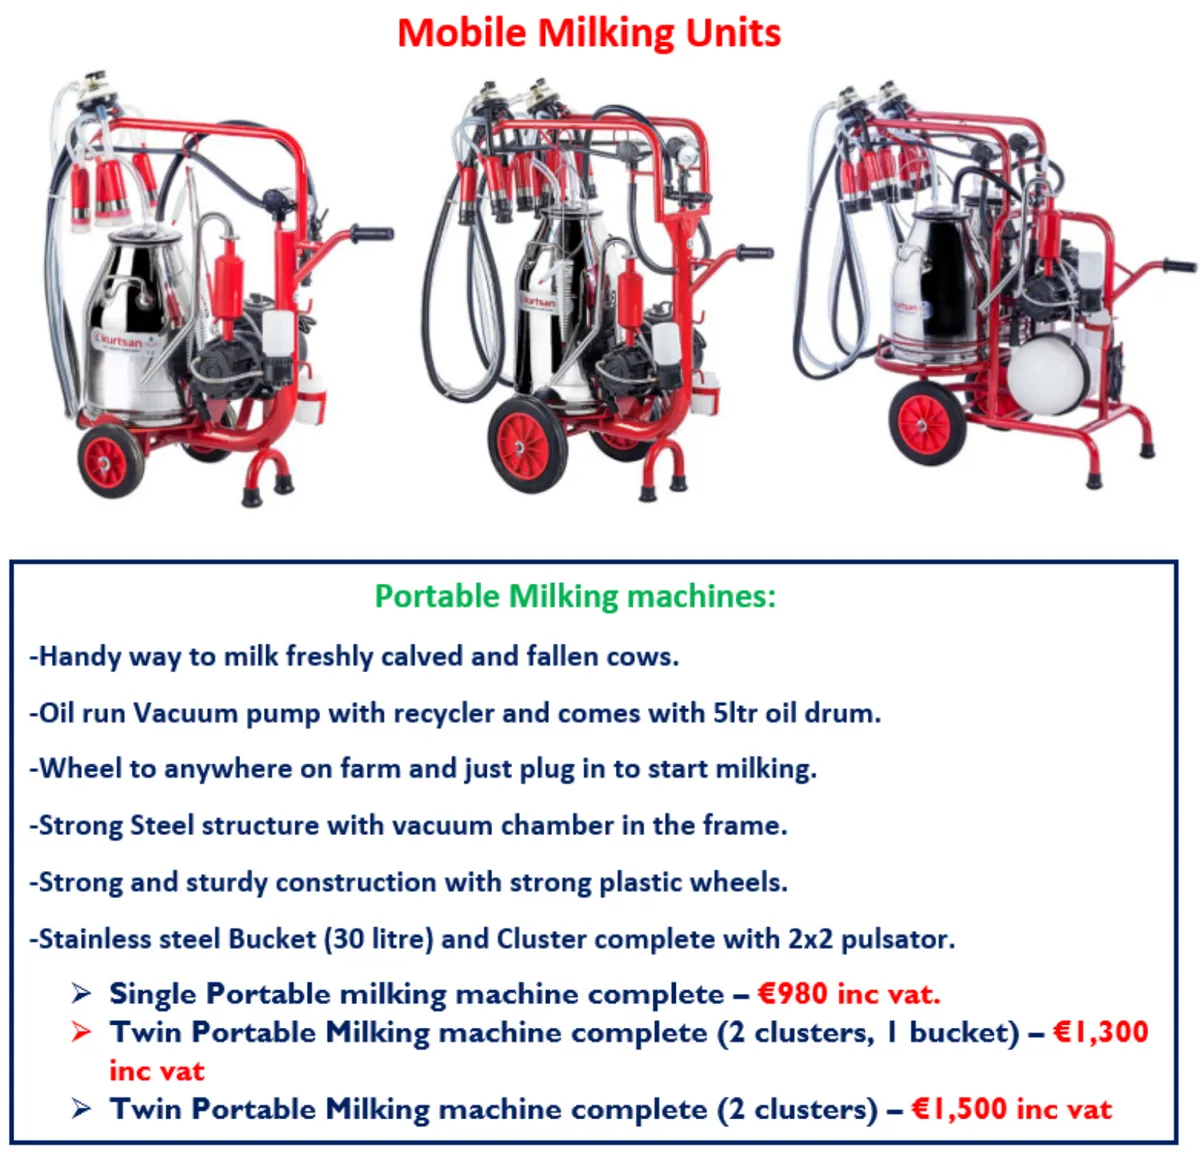 FDS Oil Run portable milking machines - Image 1